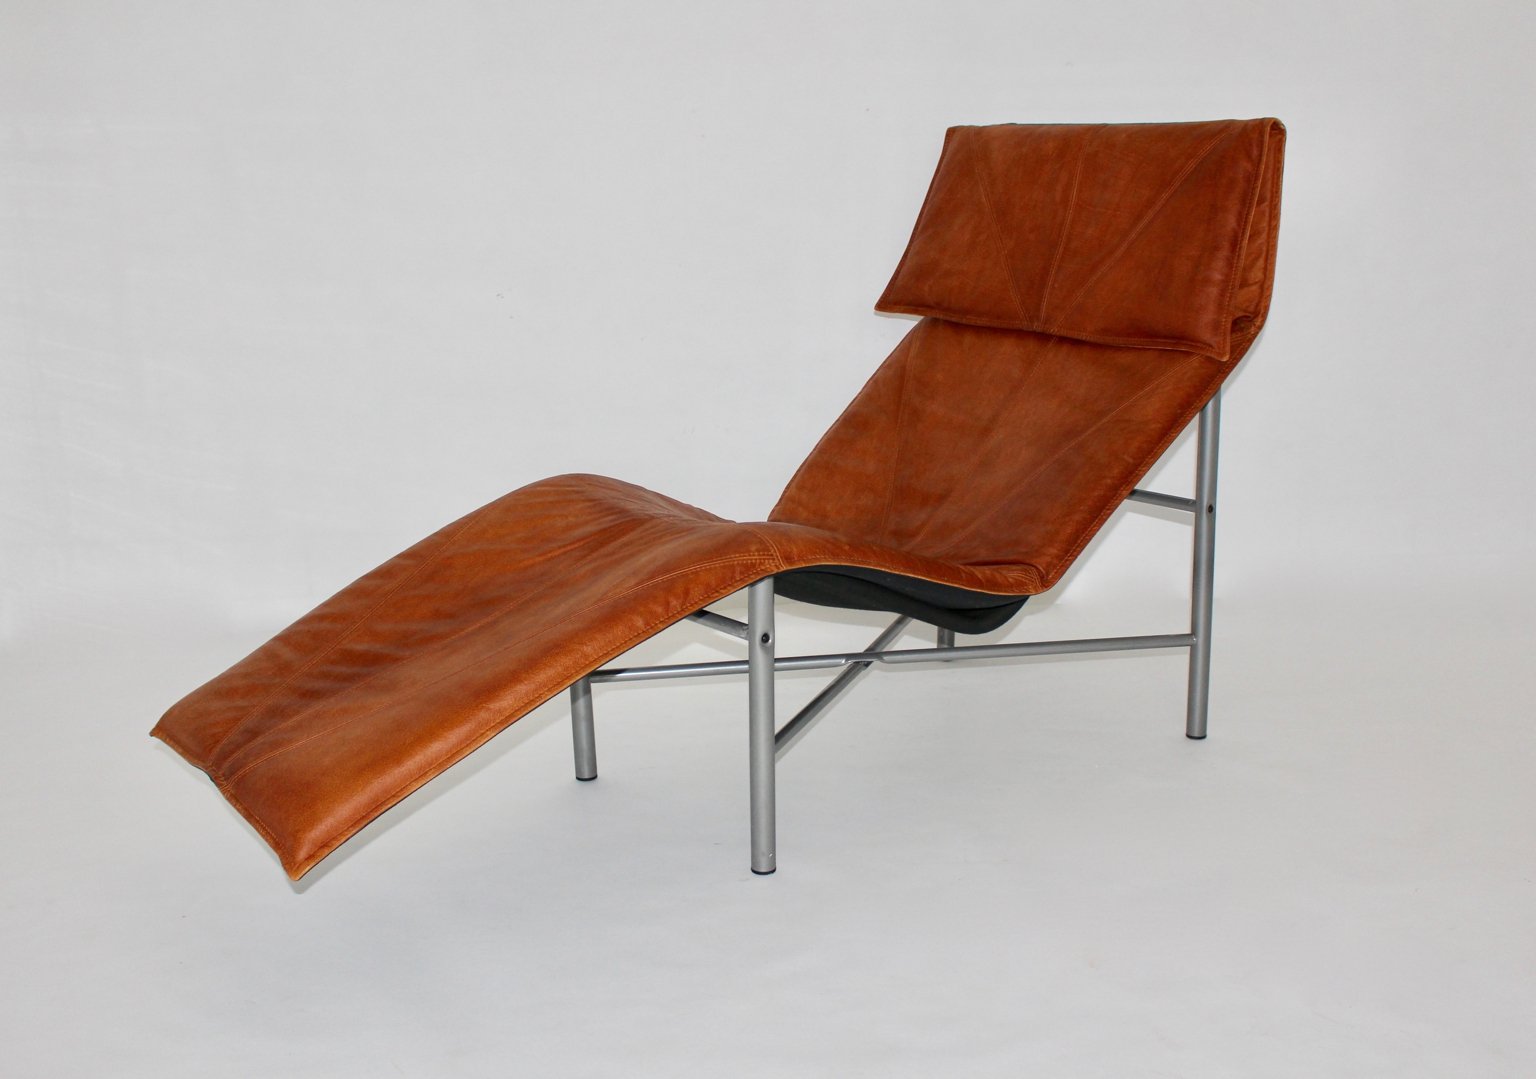 swedish cognac leather chaise lounge by tord bjorklund 1970s NB-234517